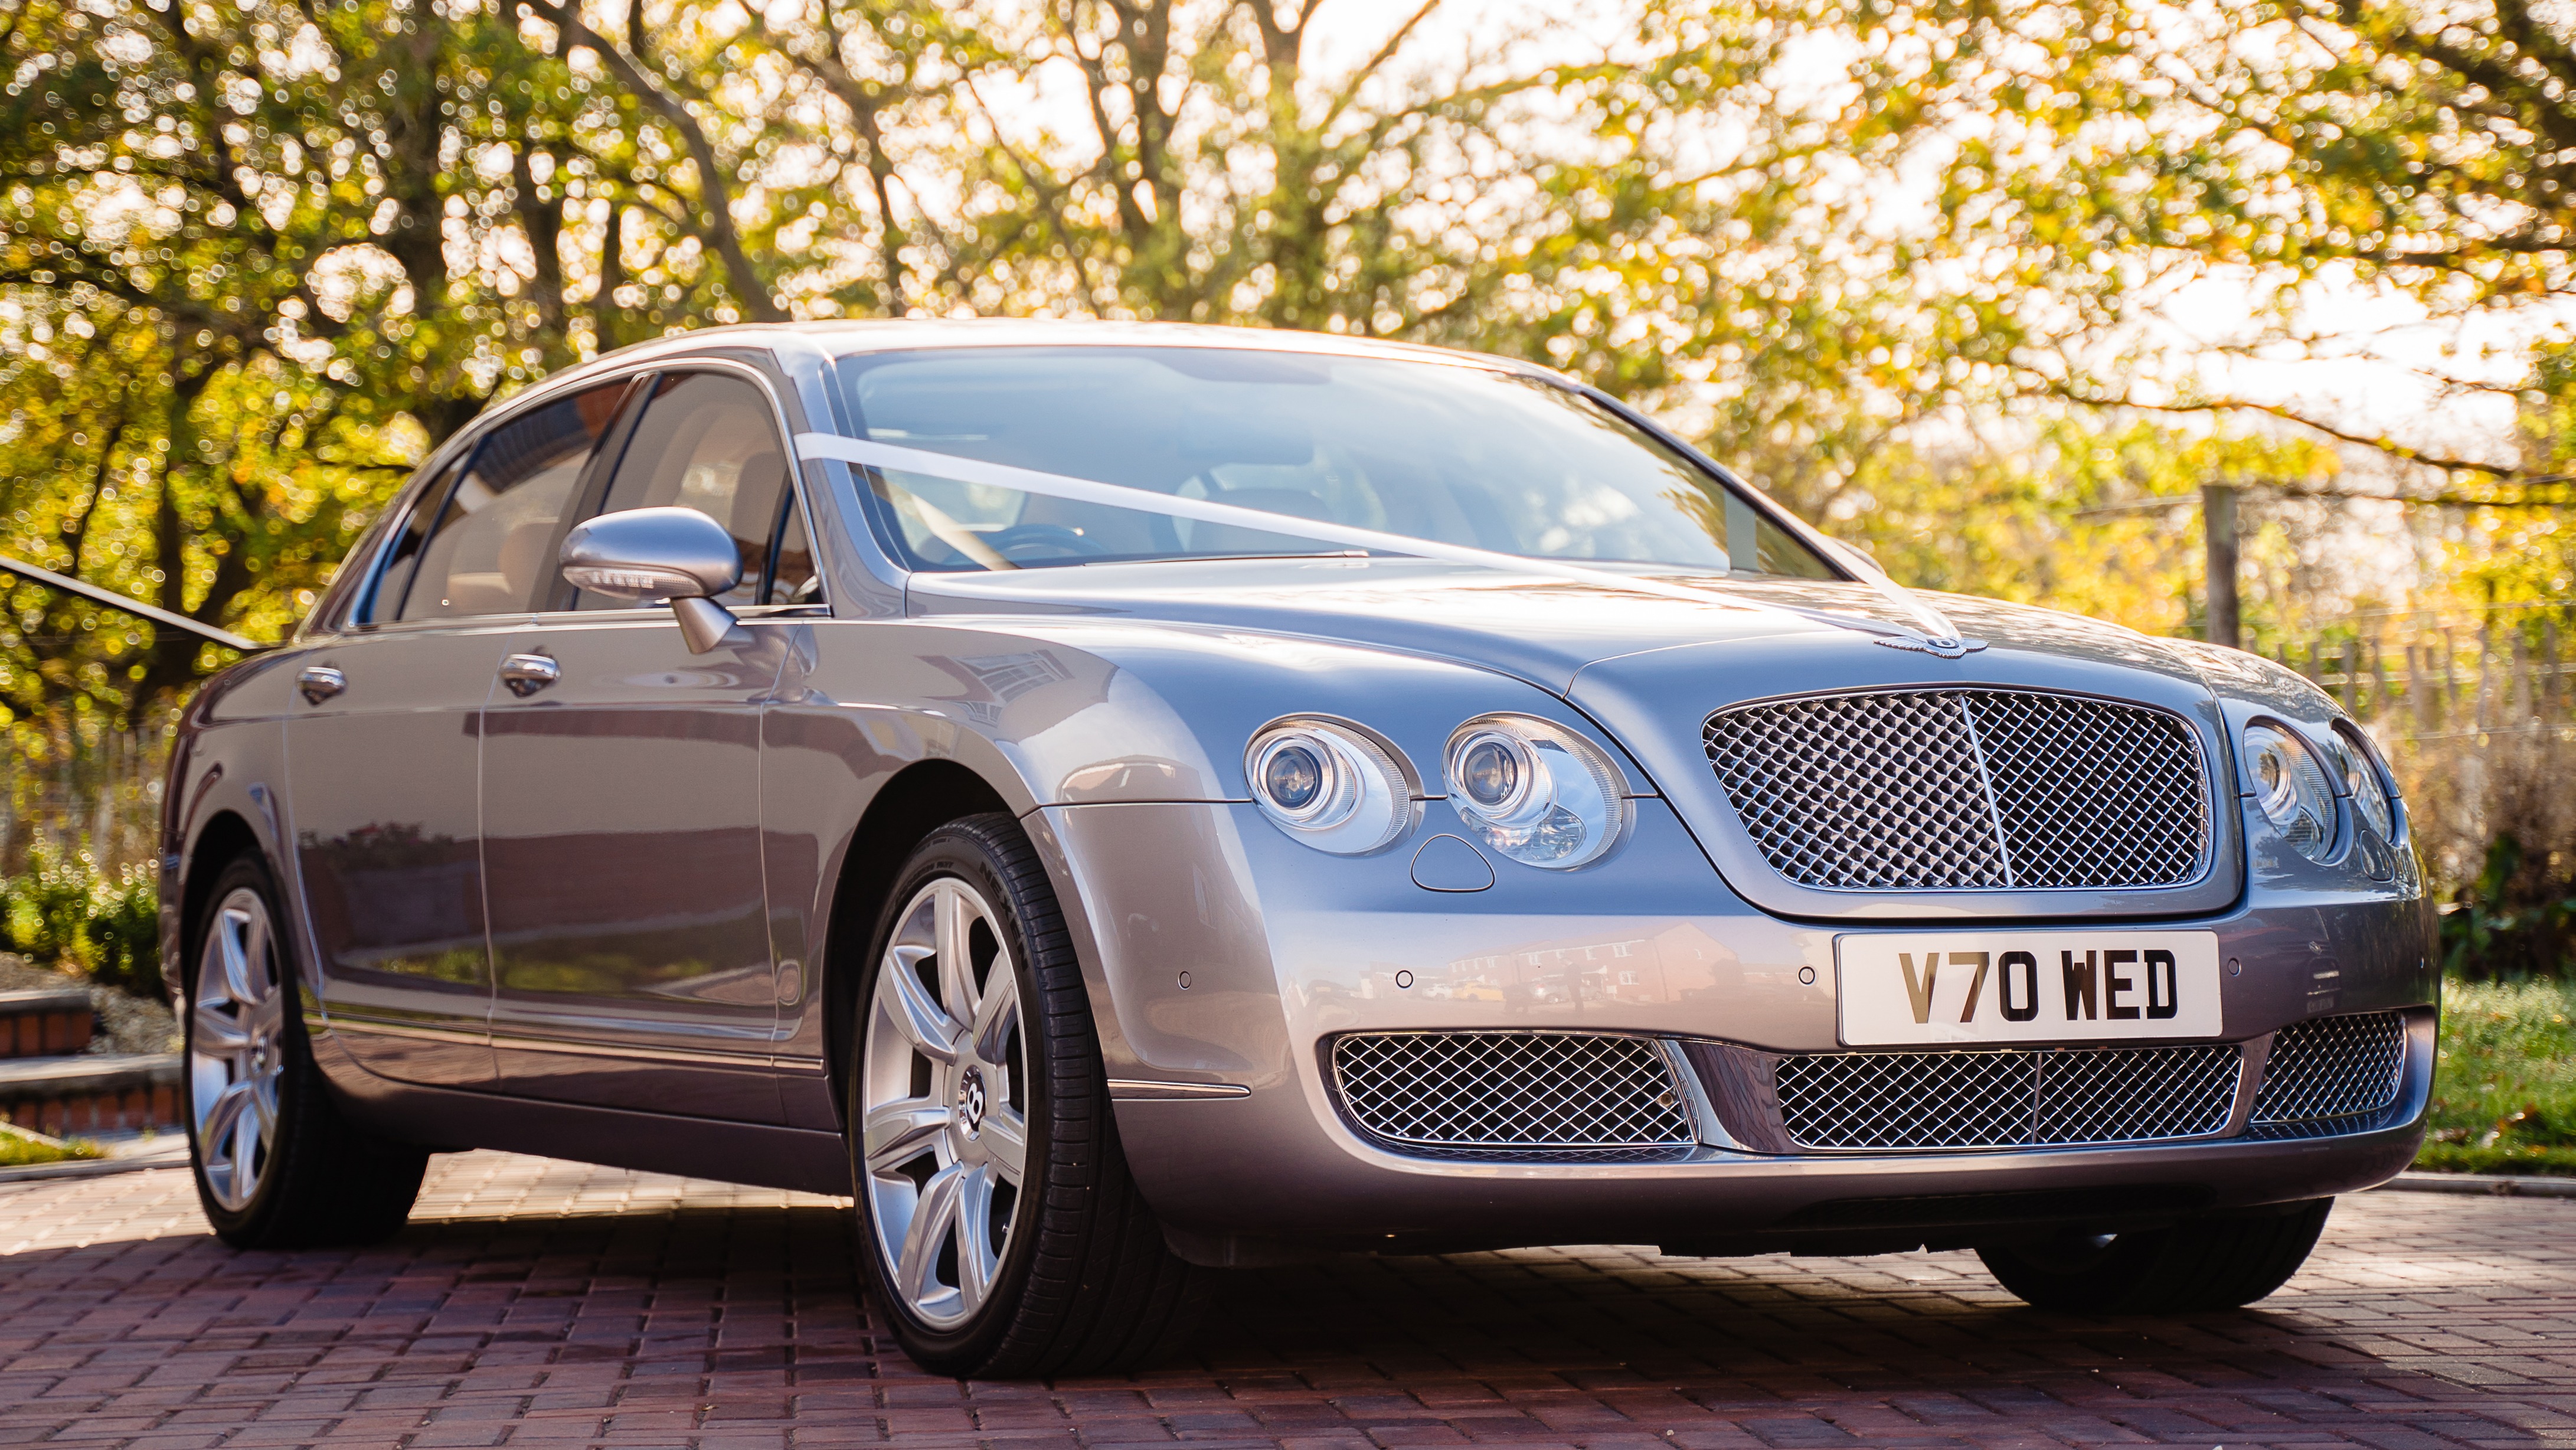 Bentley Continental Flying Spur wedding car for hire in Cannock, Staffordshire